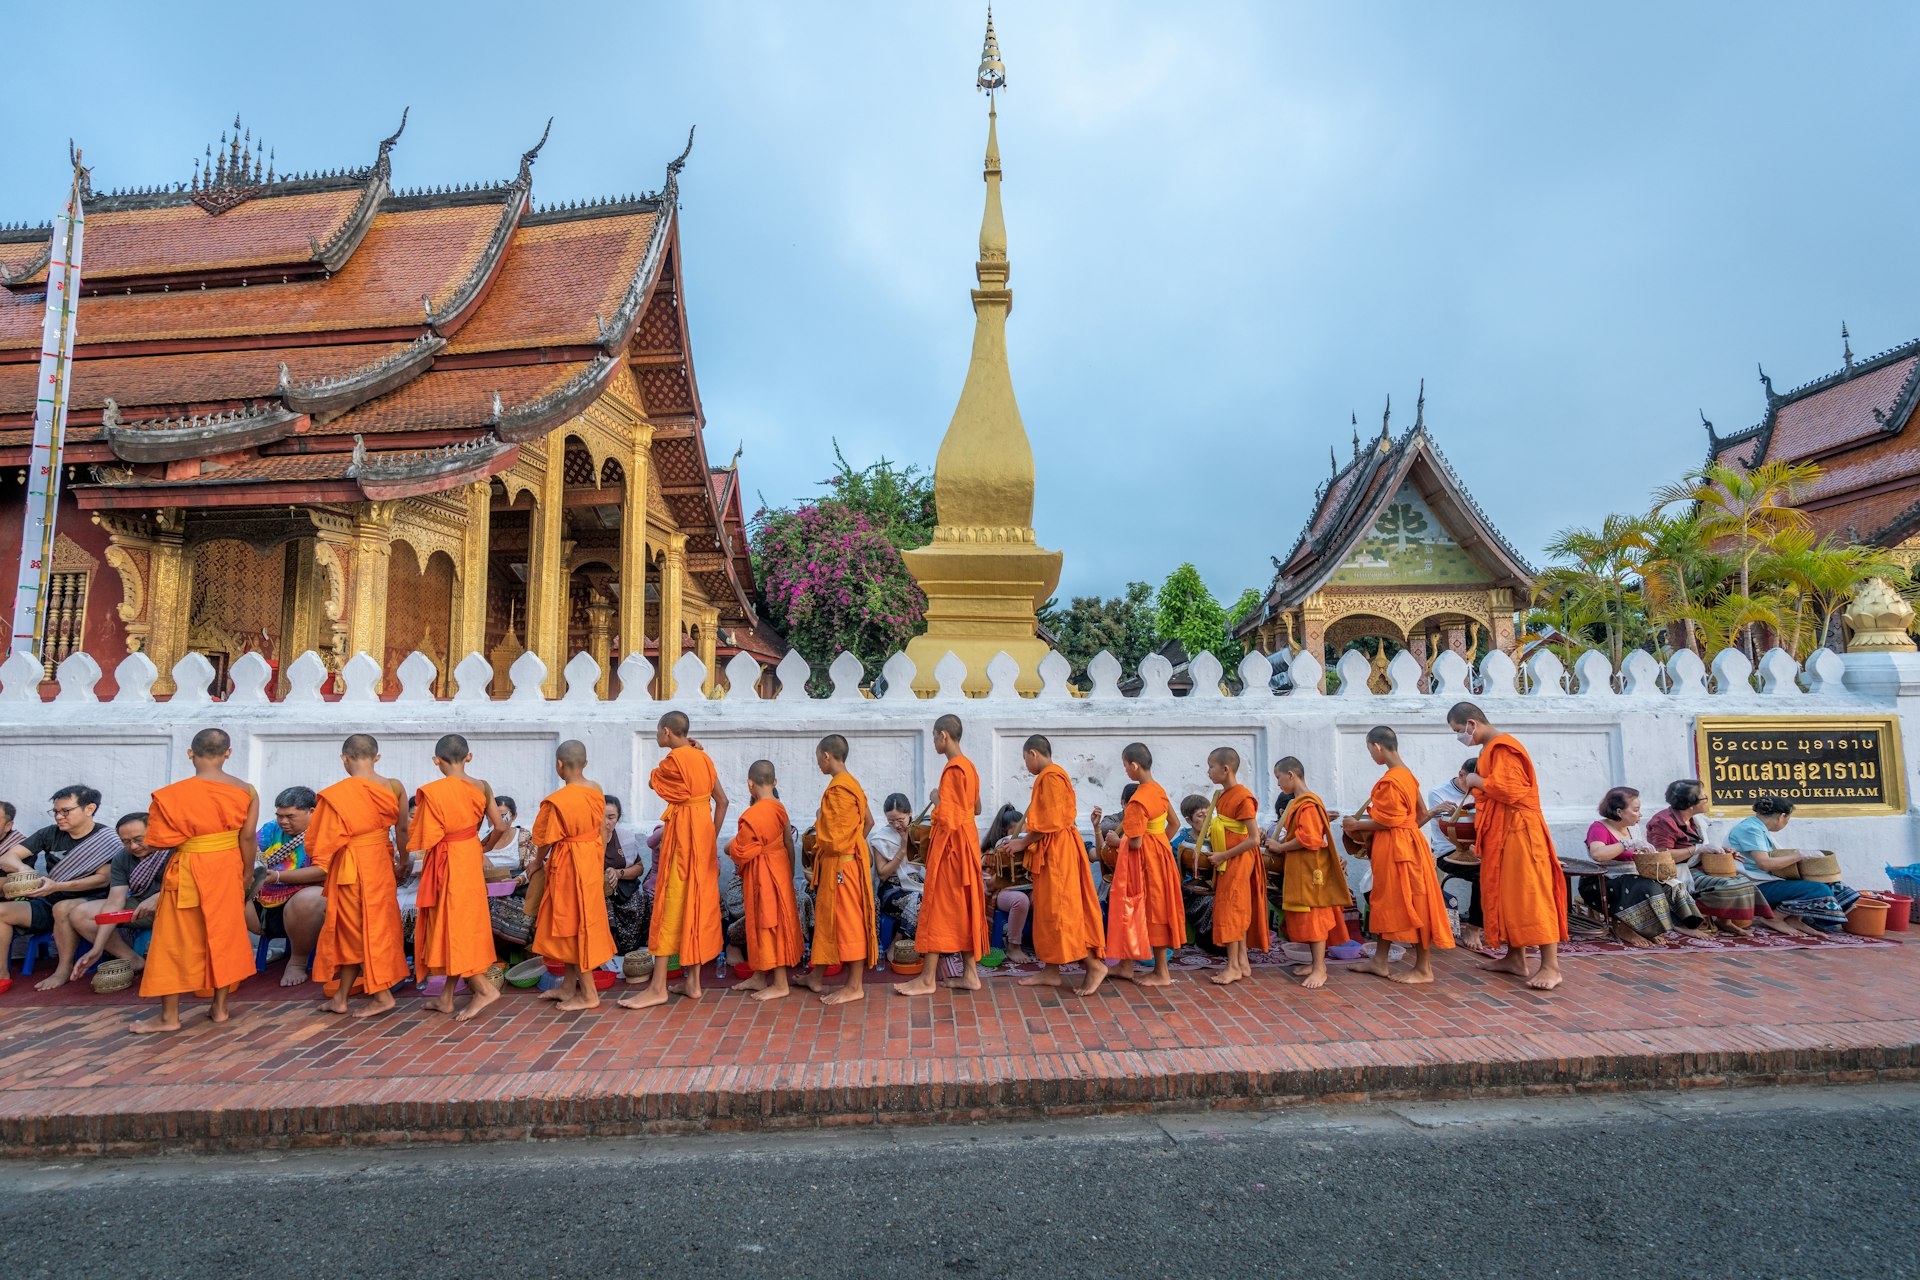 A row of monks in orange robes pass in front of a temple collecting money off people